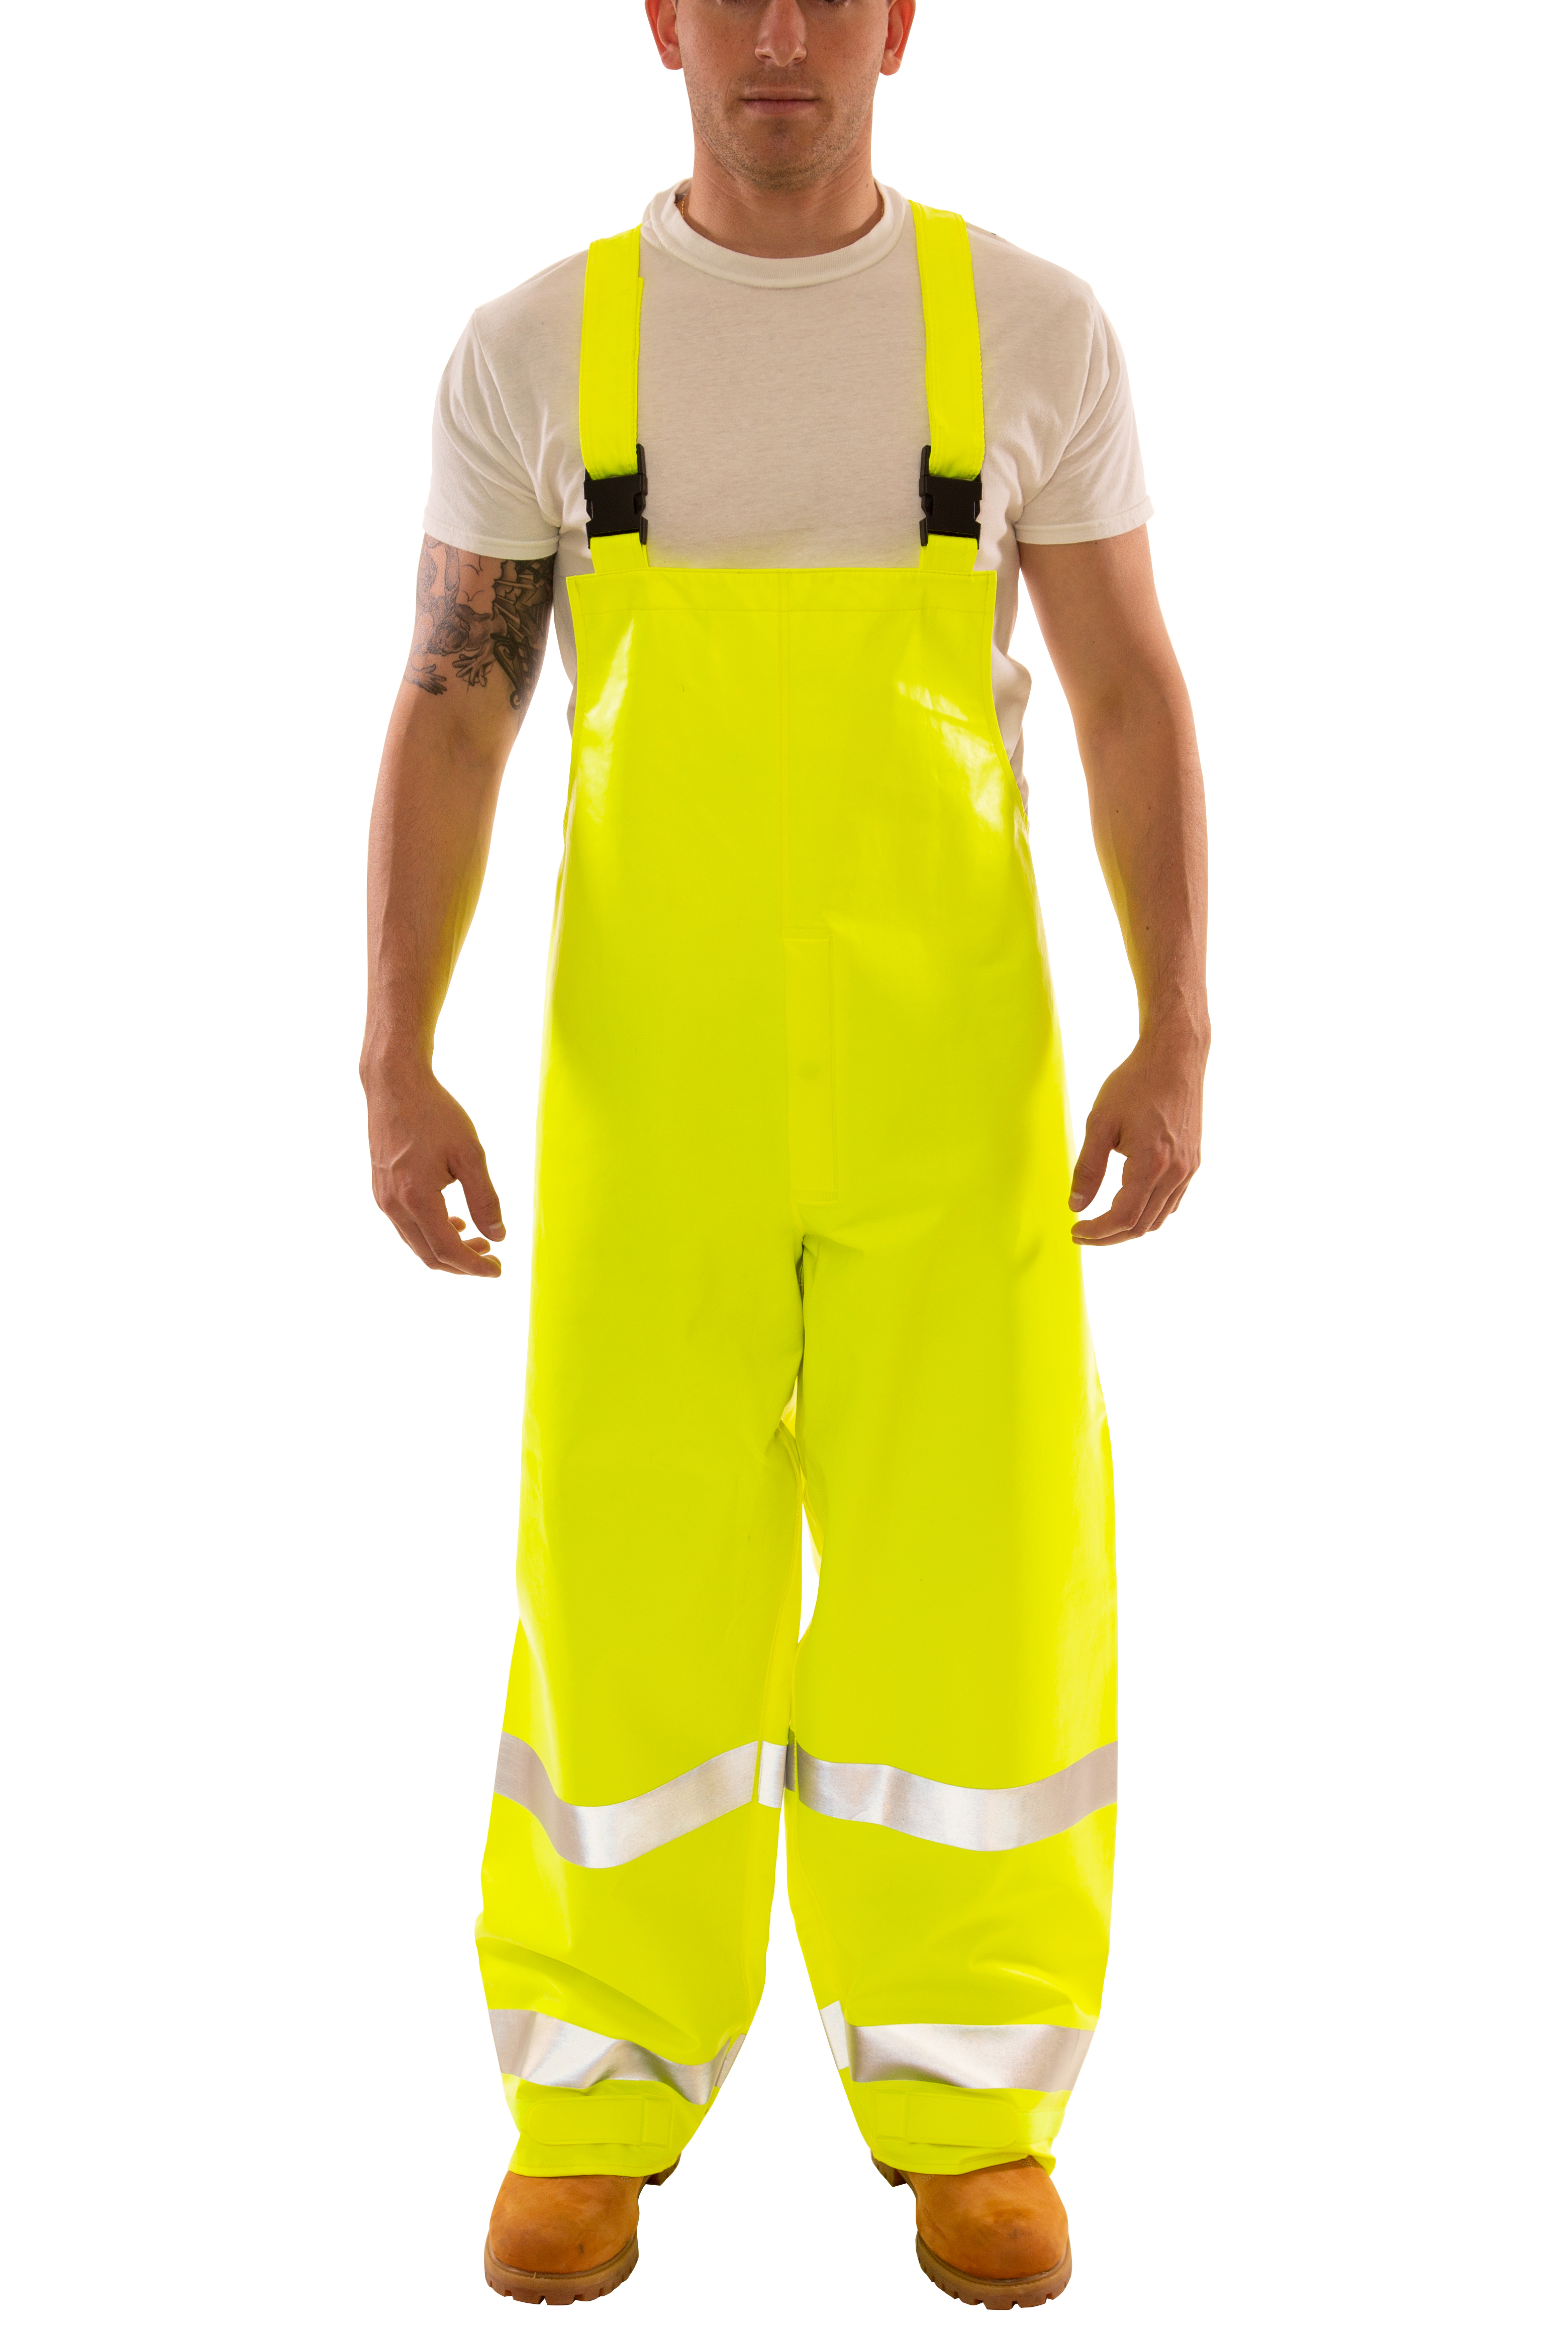 Tingley Eclipse Overalls in Fluorescent Yellow - Arc Flash Protection